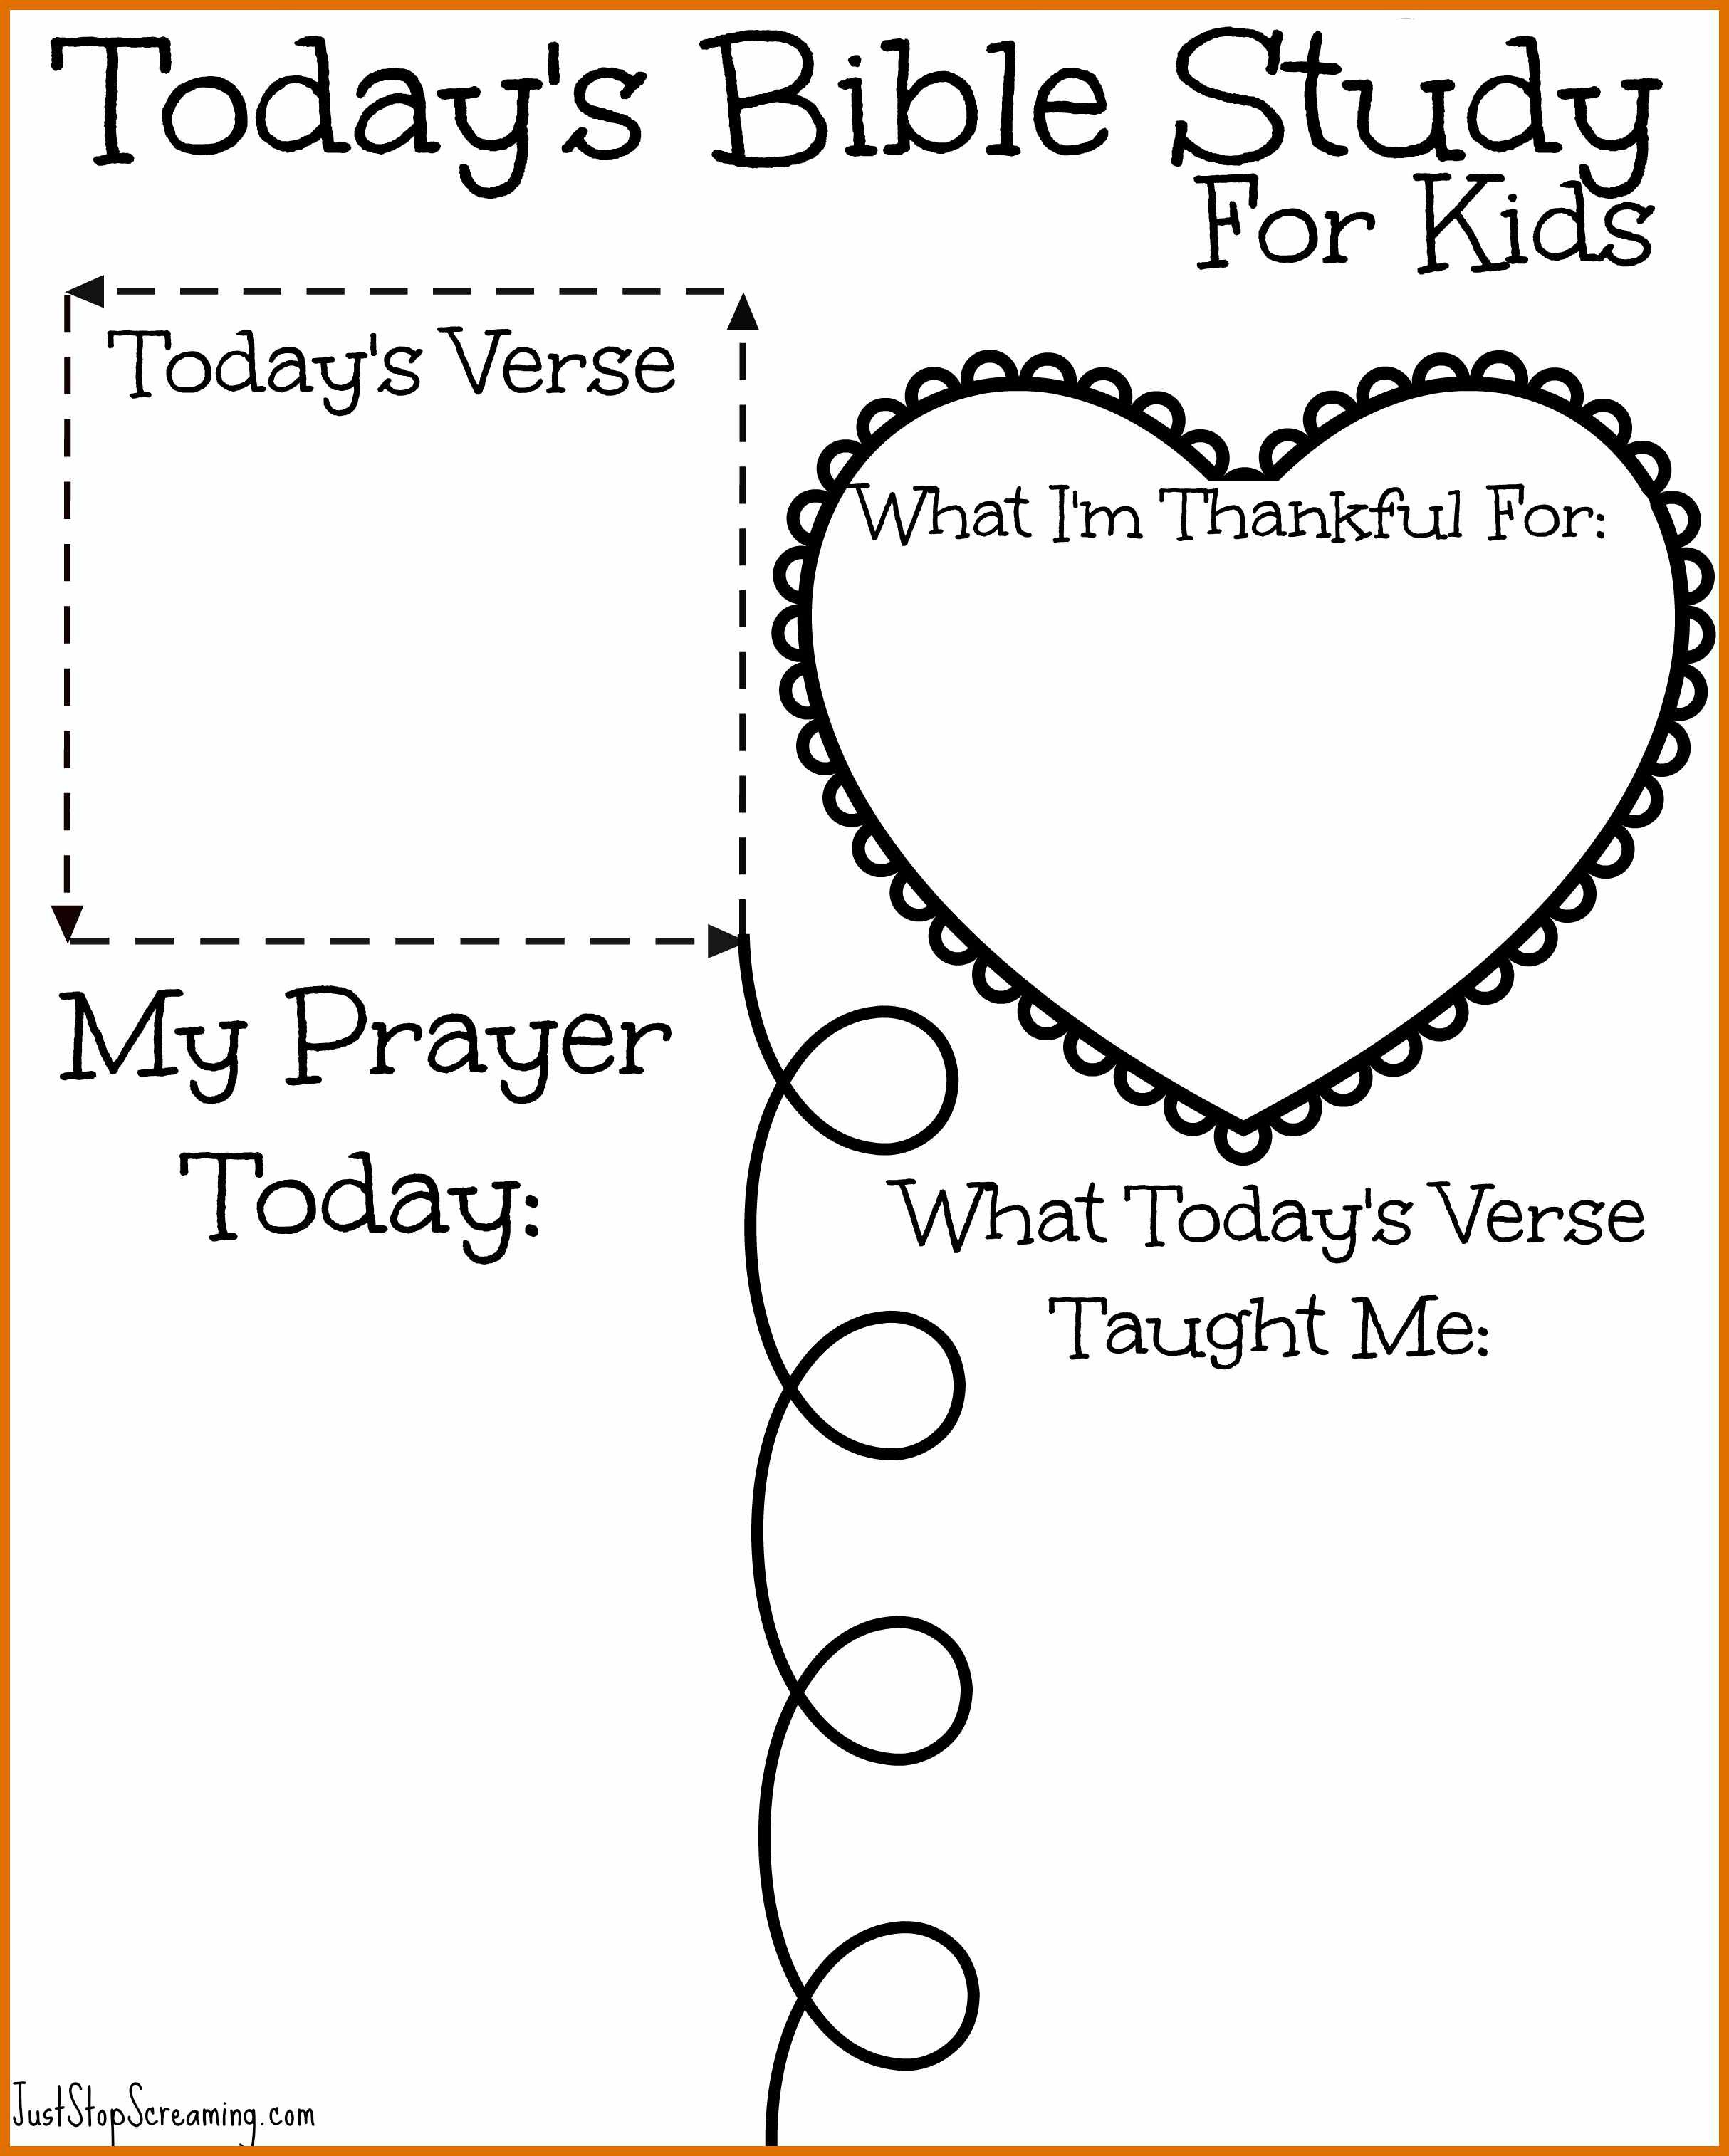 8-9 Free Printable Bible Study Worksheets | Sowtemplate - Free Printable Bible Lessons For Youth